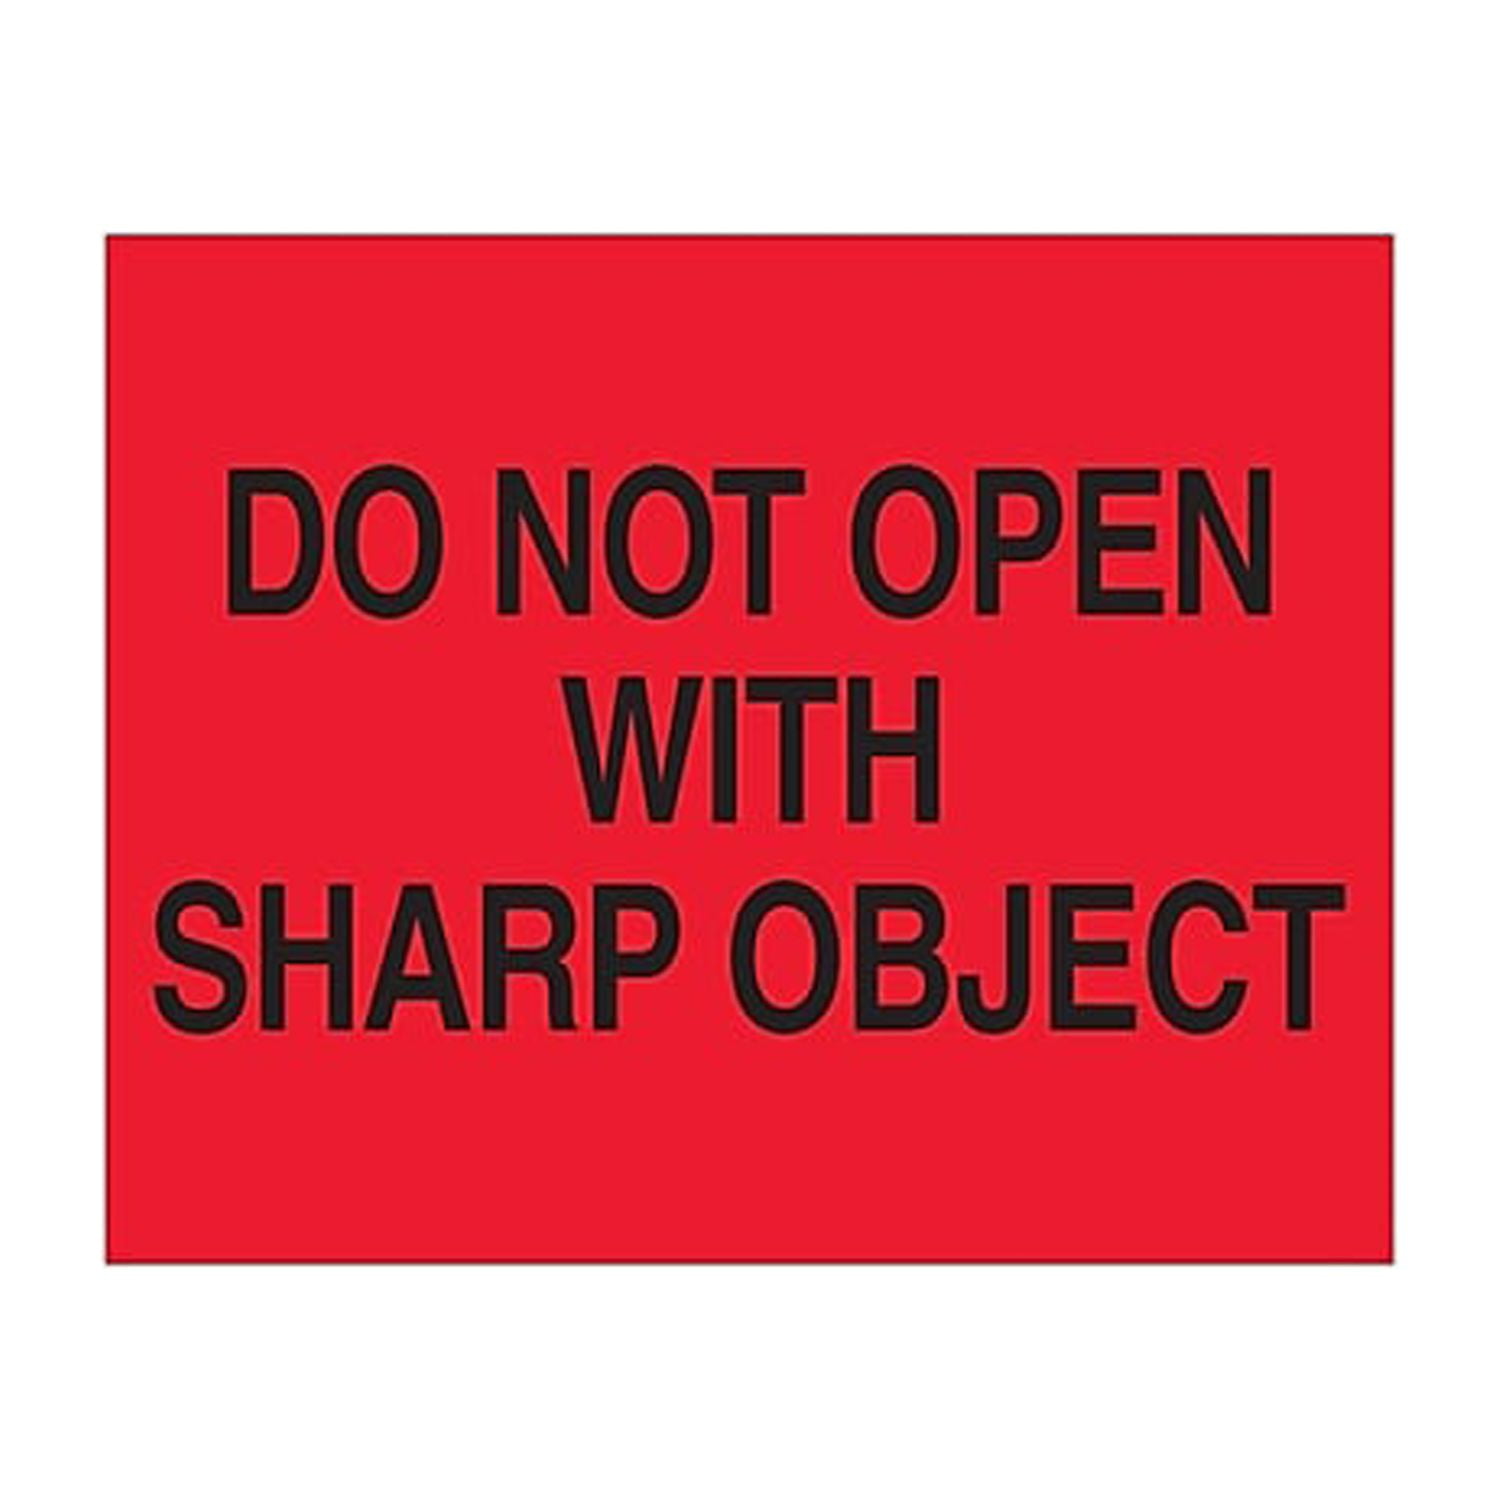 Dl1631 8 X 10 In. Do Not Open With Sharp Object Labels, Fluorescent Red